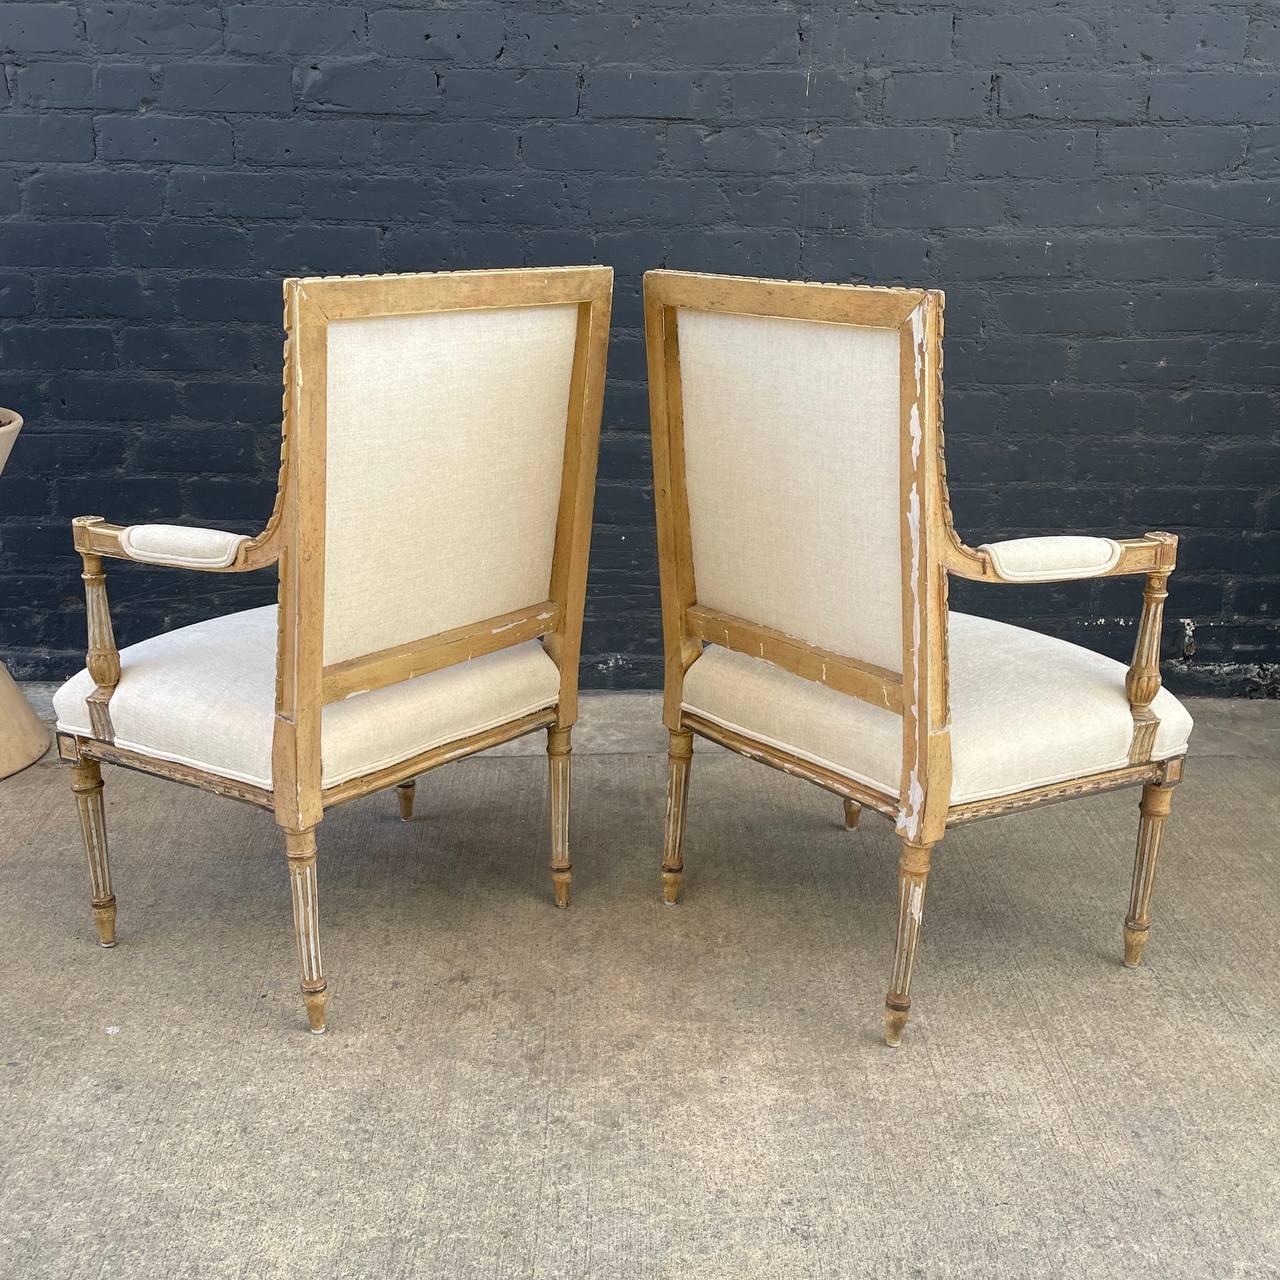 Mid-20th Century Pair Of French Neoclassical-Style Painted Armchairs 